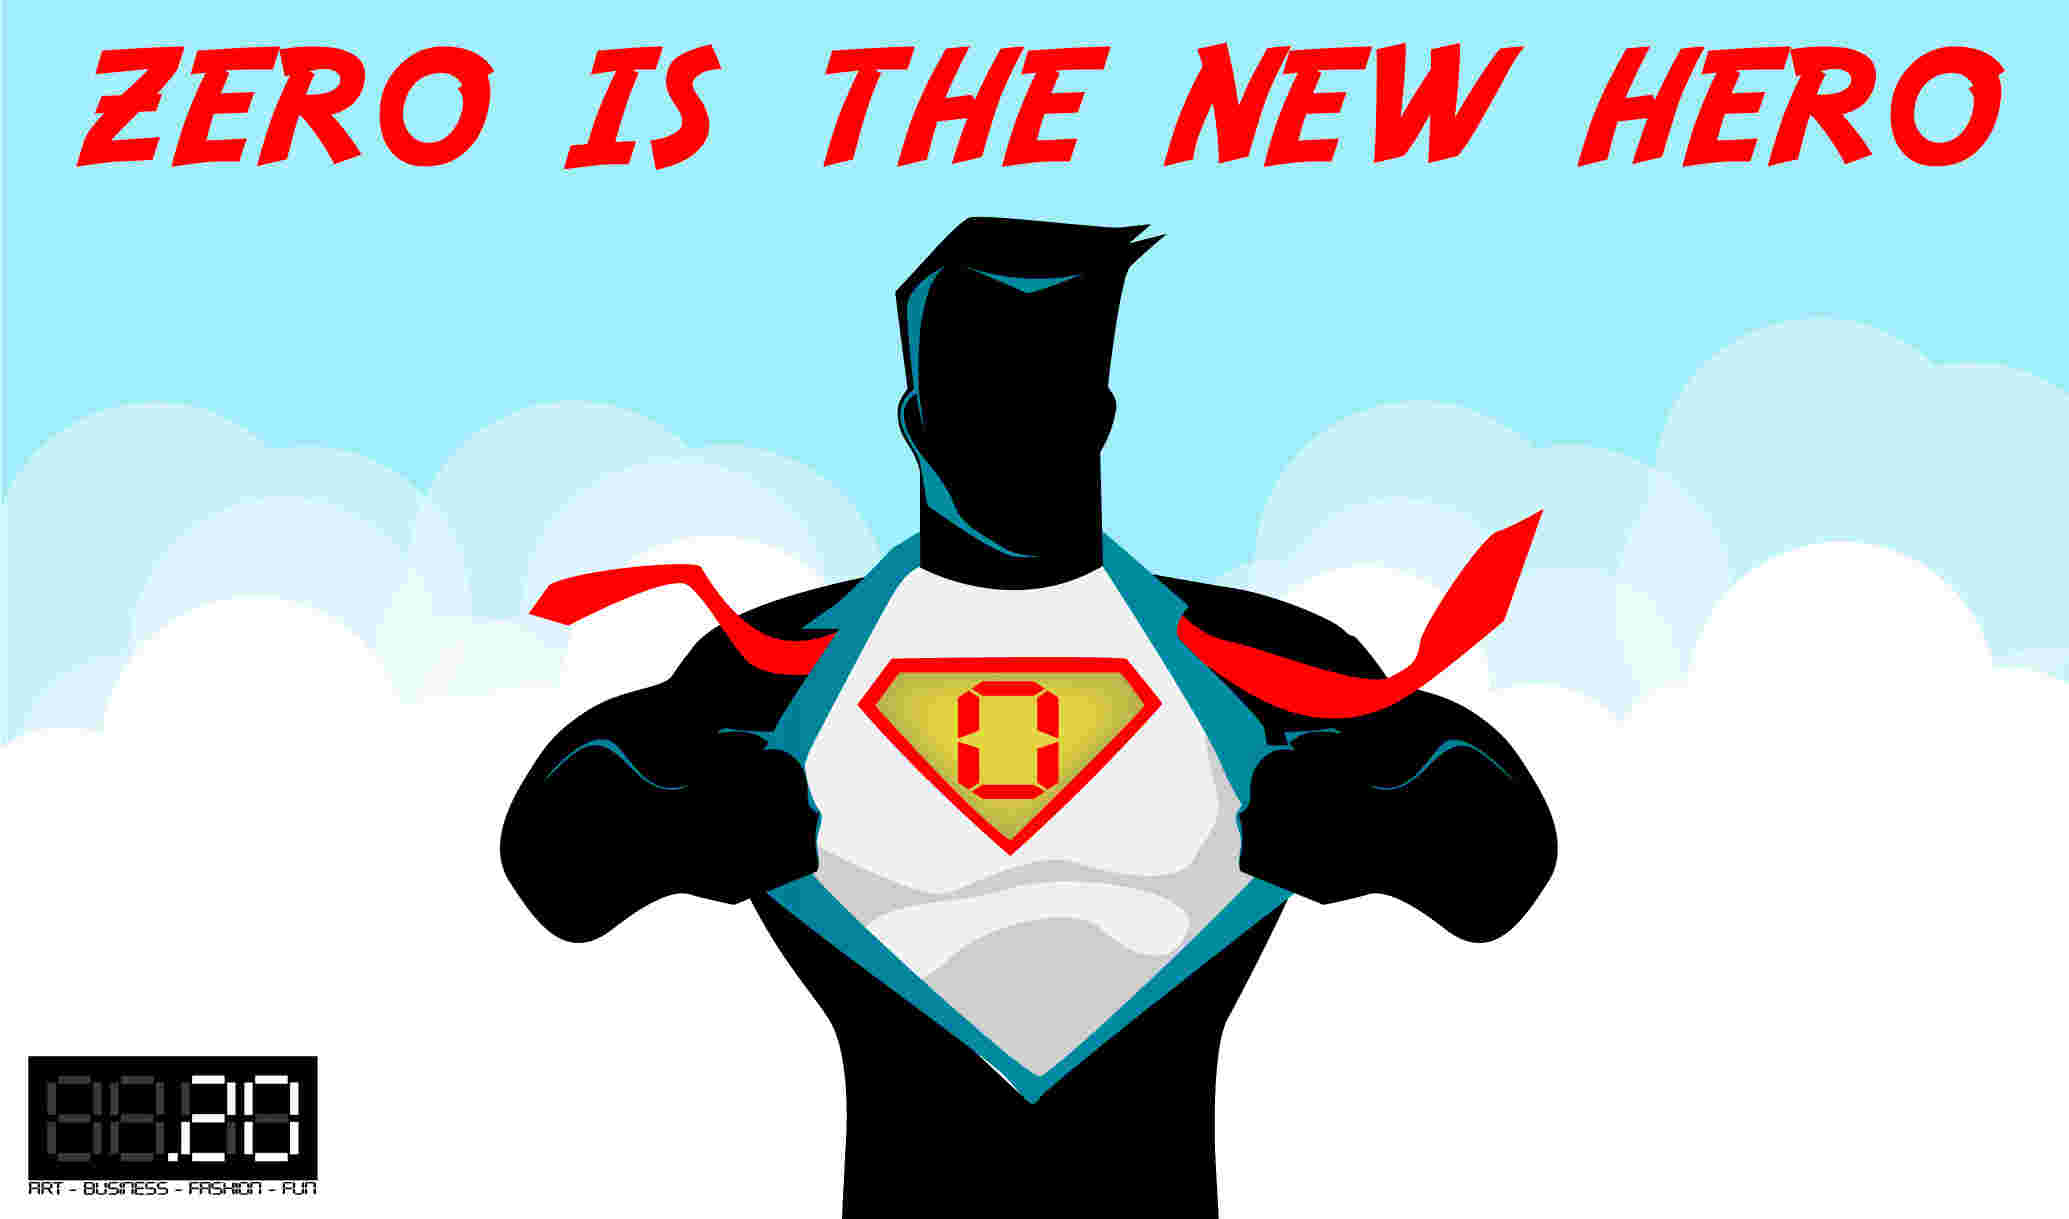 Google Featured Snippet: zero is the new hero!